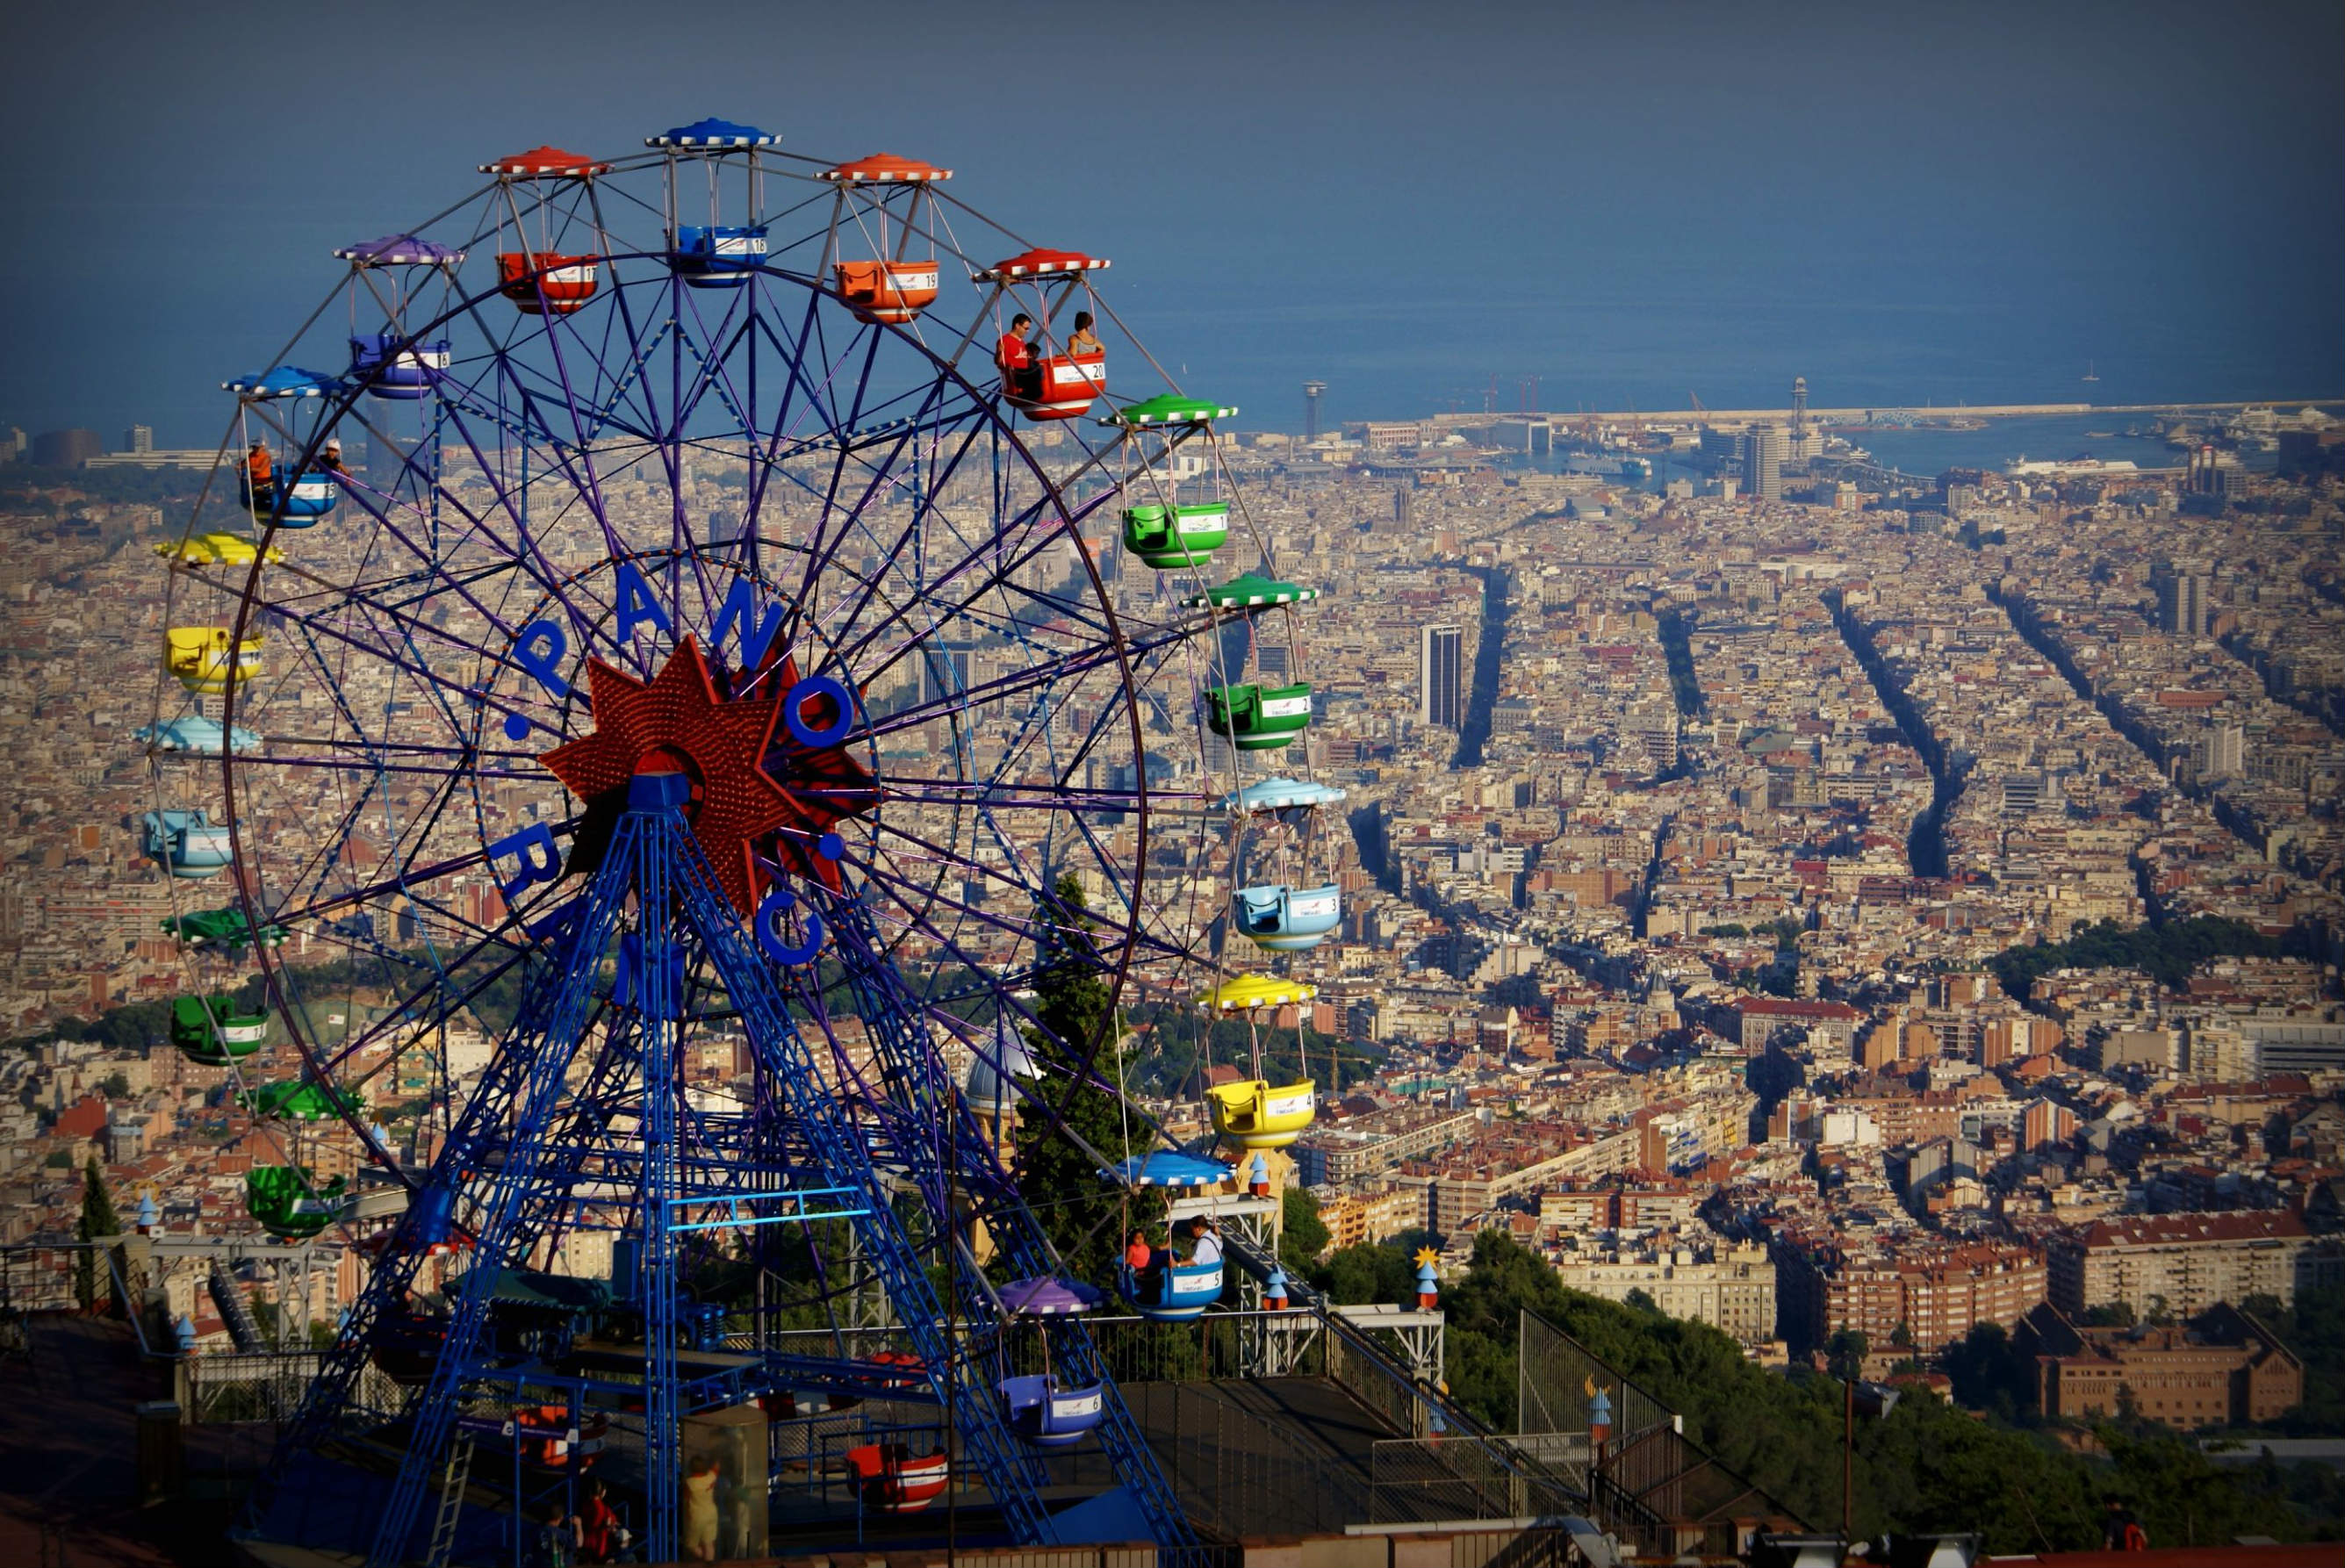 The Best Theme Parks To Visit In Spain